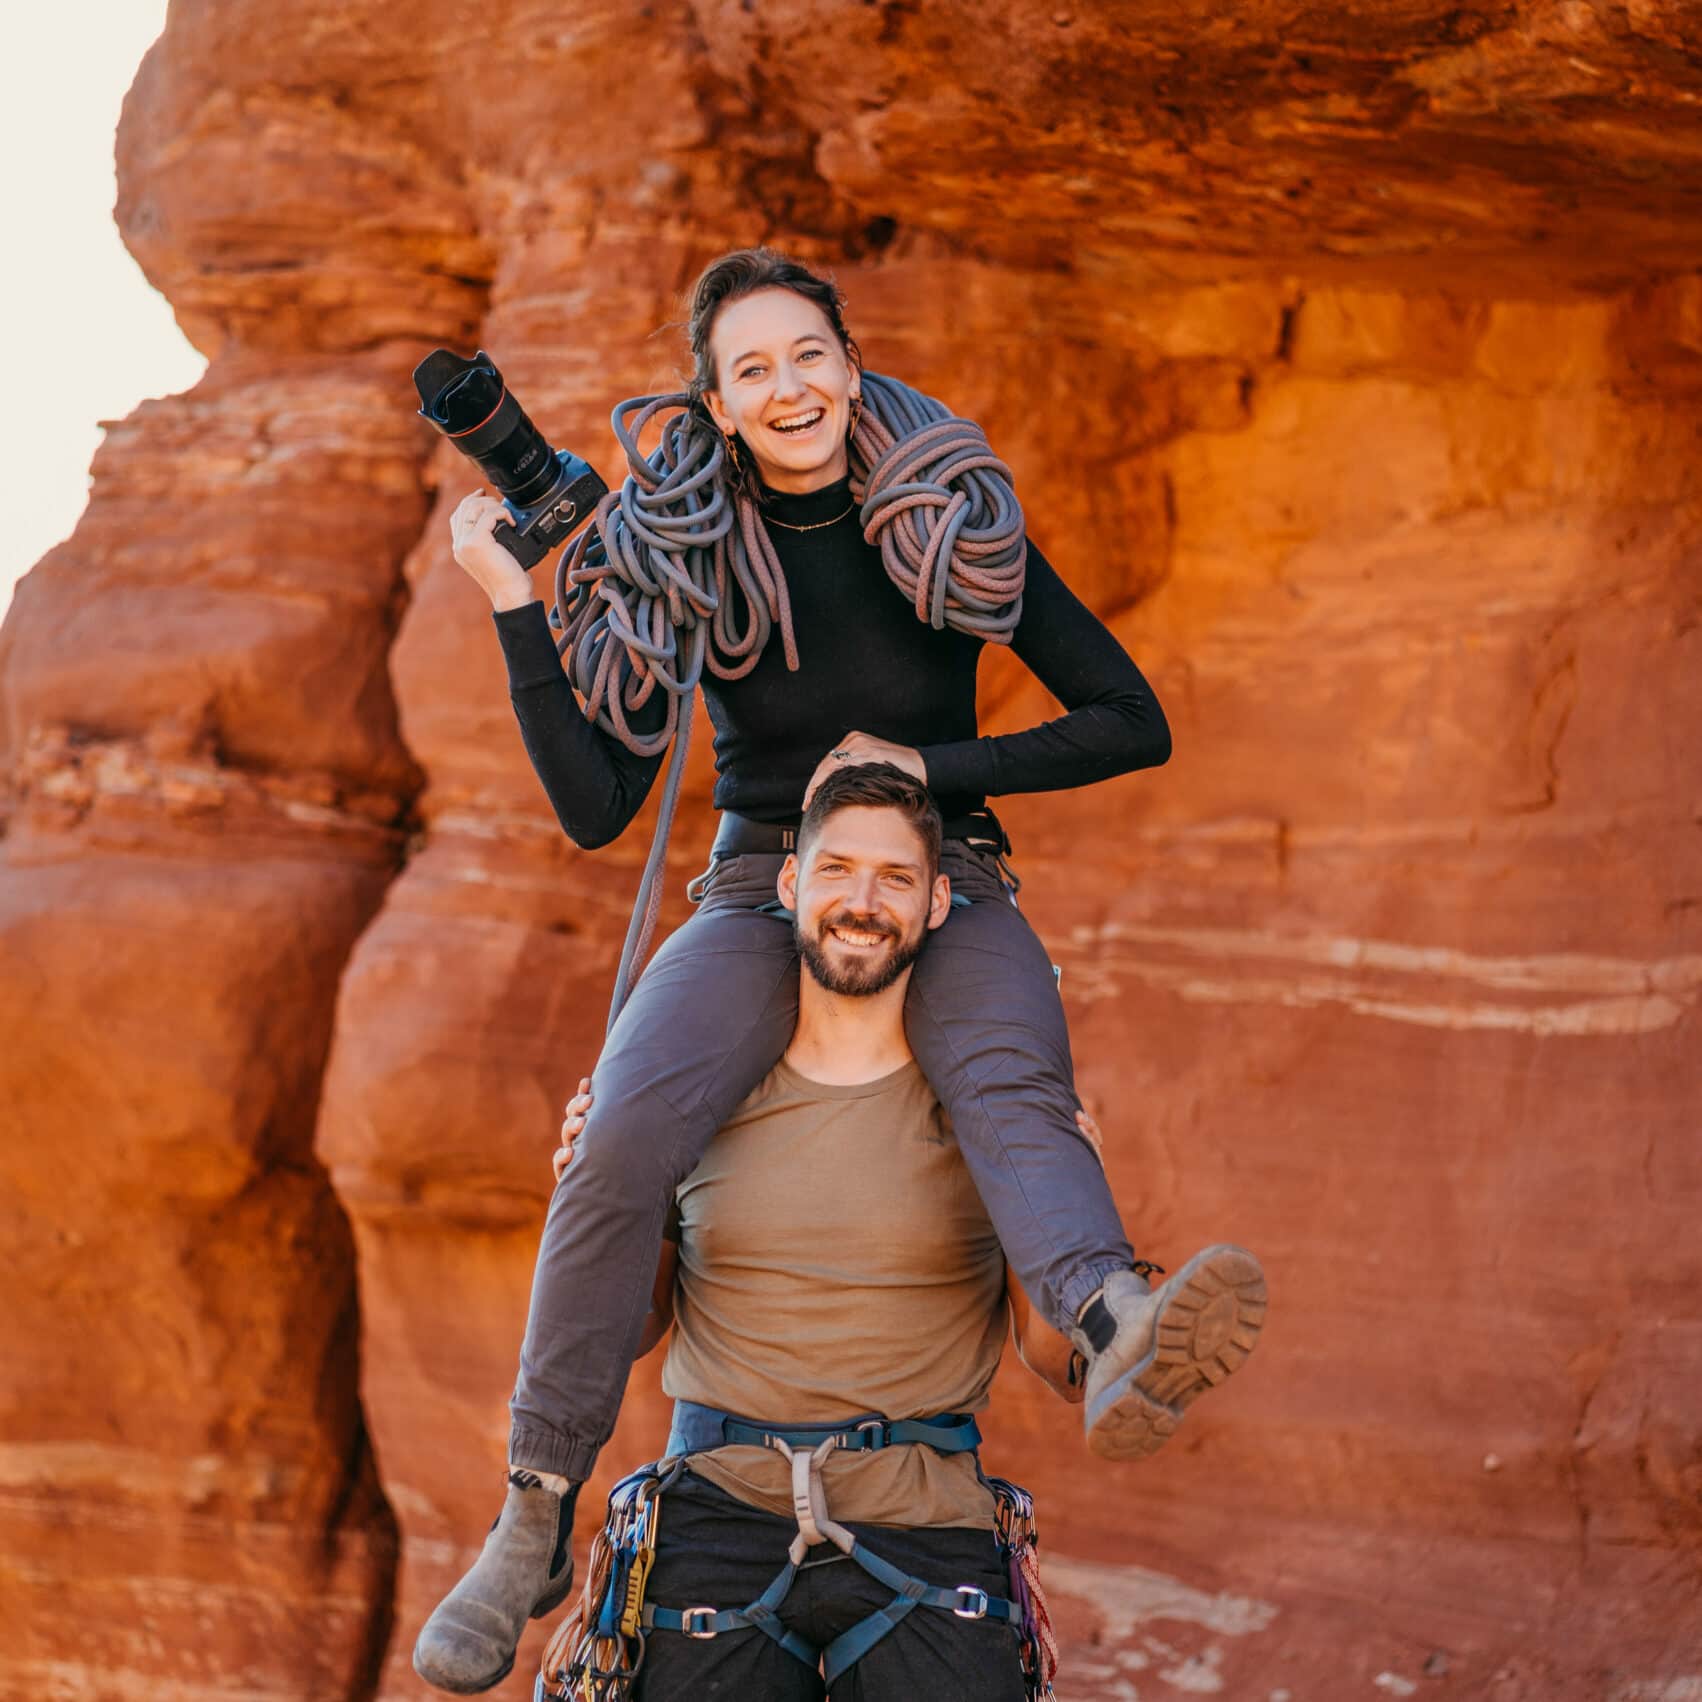 A man holds a woman on his shoulders while they both have climbing gear and ropes on them. The woman is holding a camera and they are both smiling.